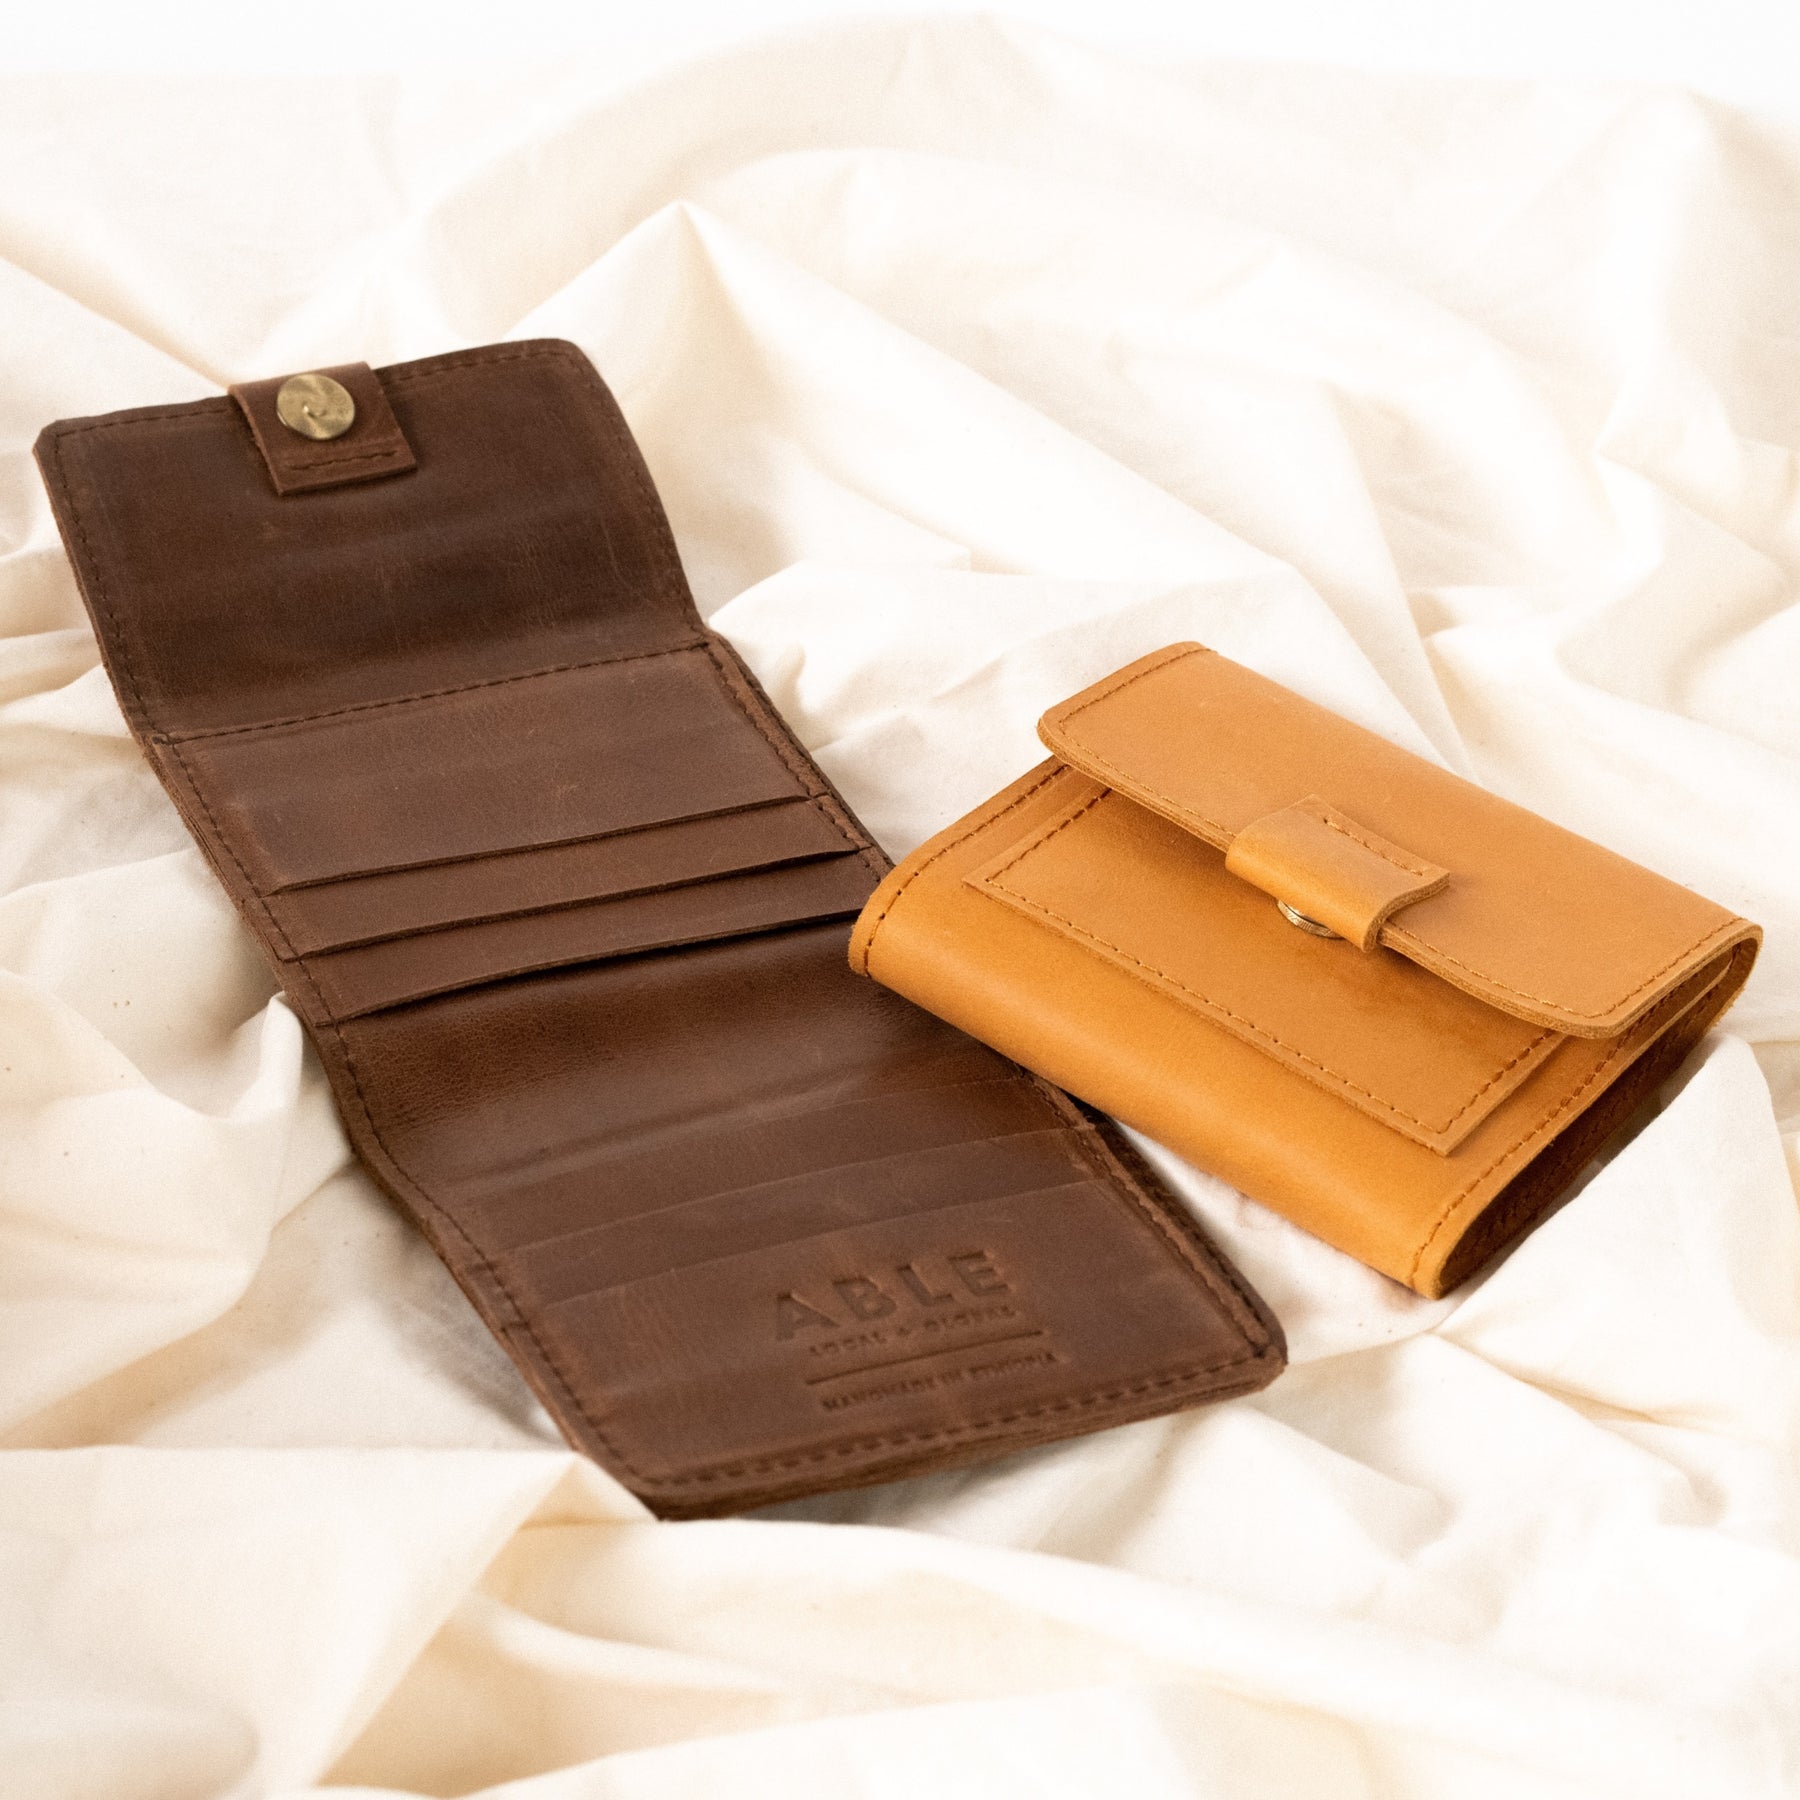 ABLE Kene Square Wallet whiskey leather